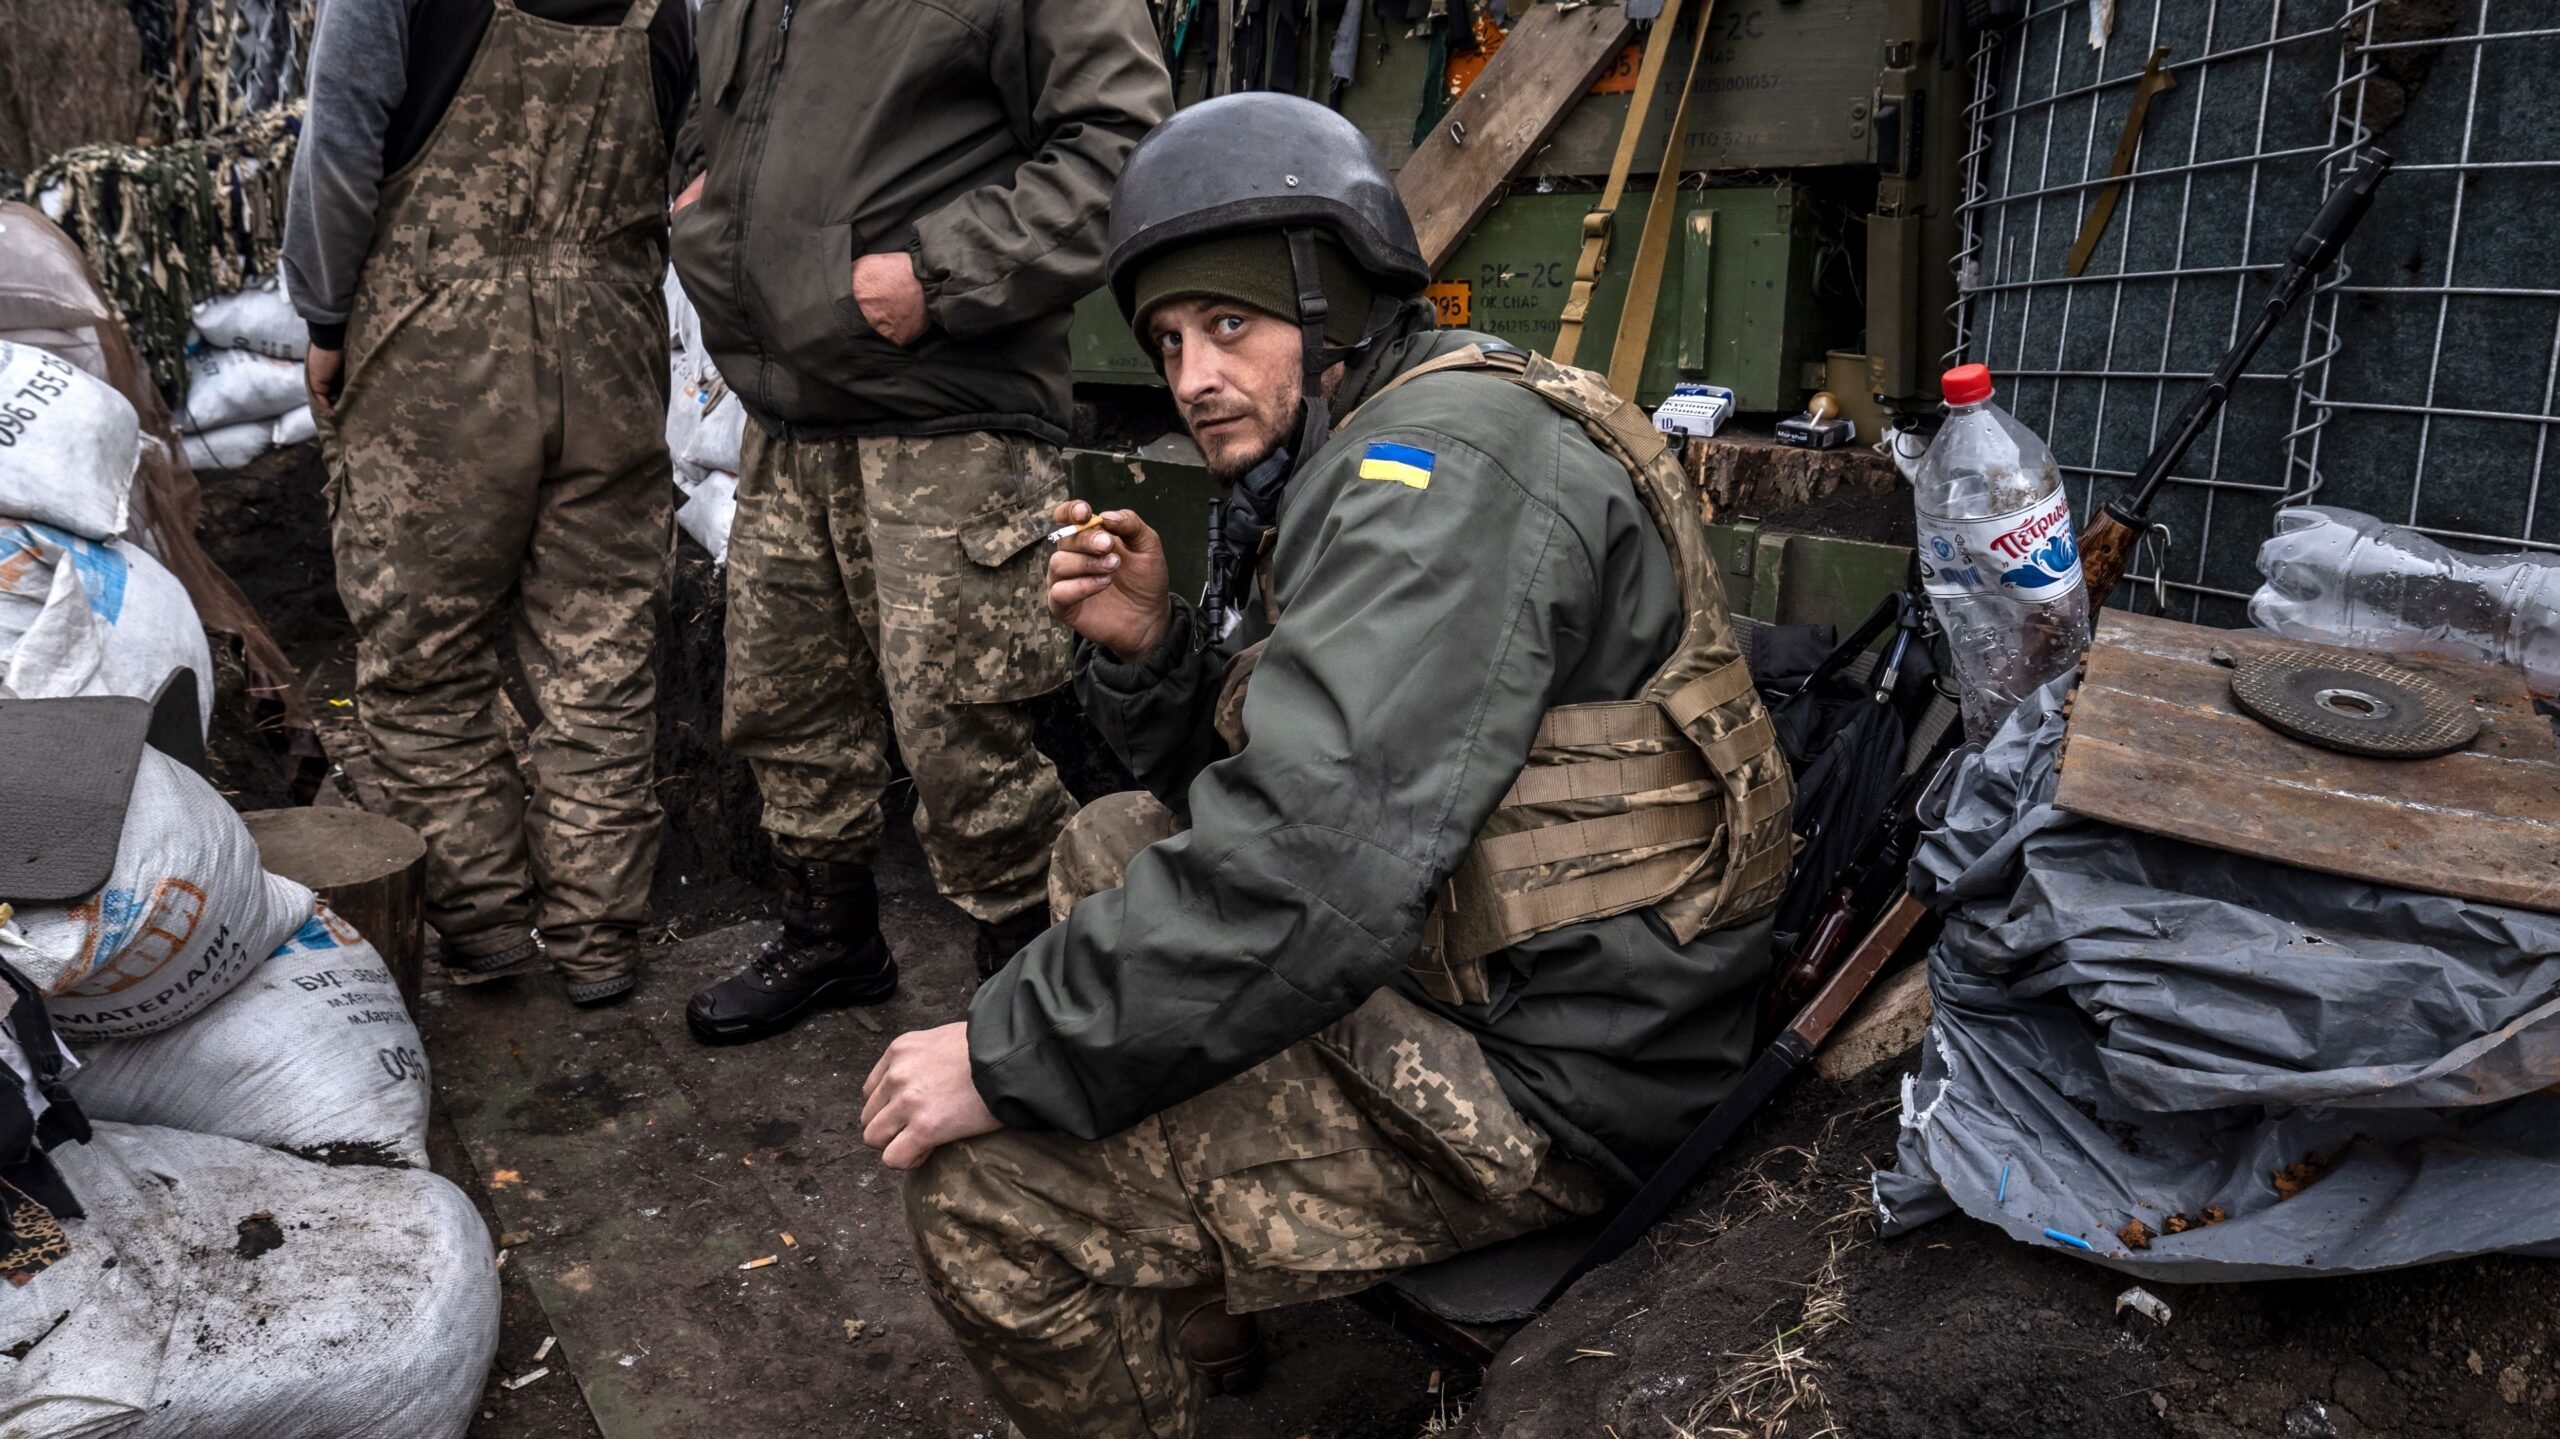 Ukrainian partisans say they killed dozens of Russian soldiers by